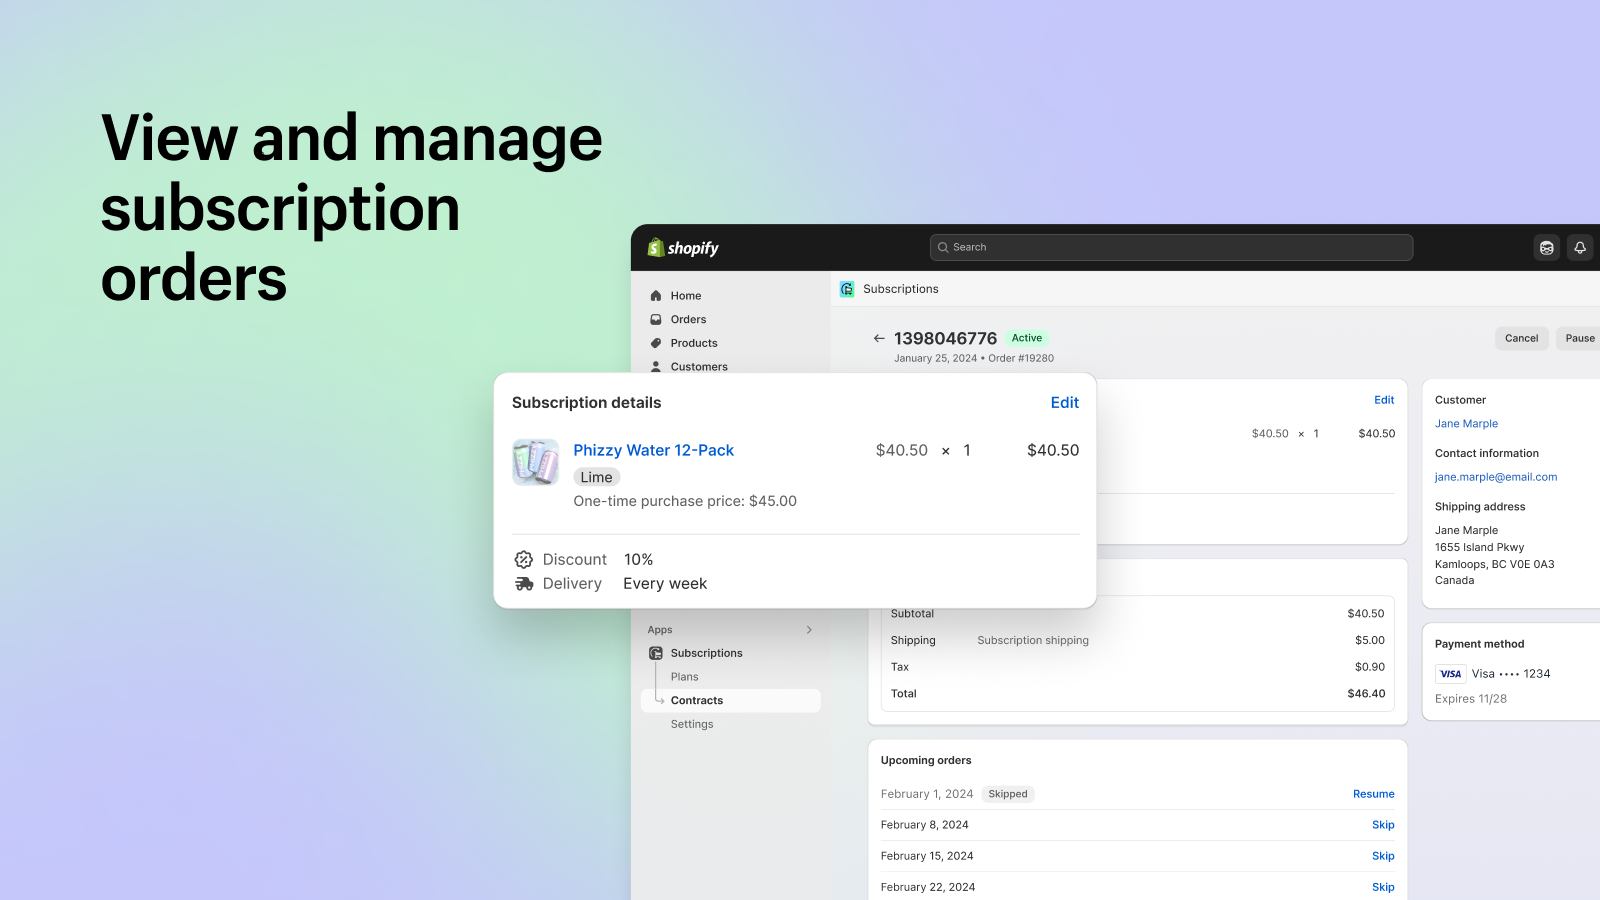 View and manage subscription orders